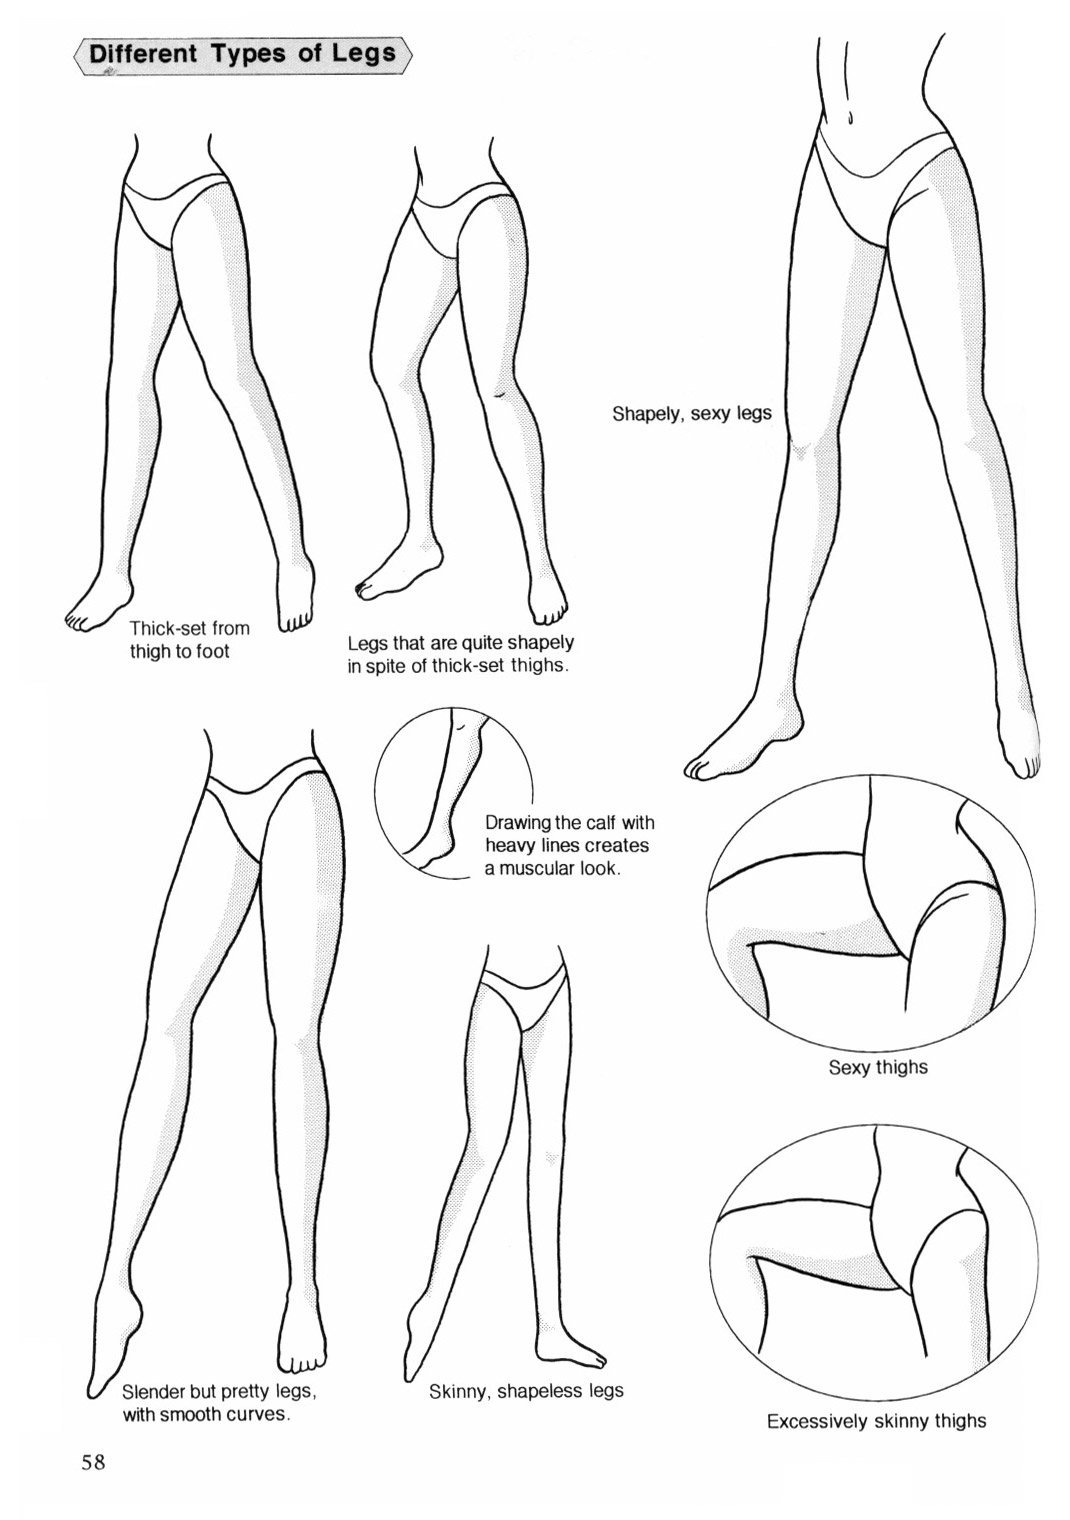 howtodrawfemalecharacters46.jpg. how-to-draw-female-characters (46). 